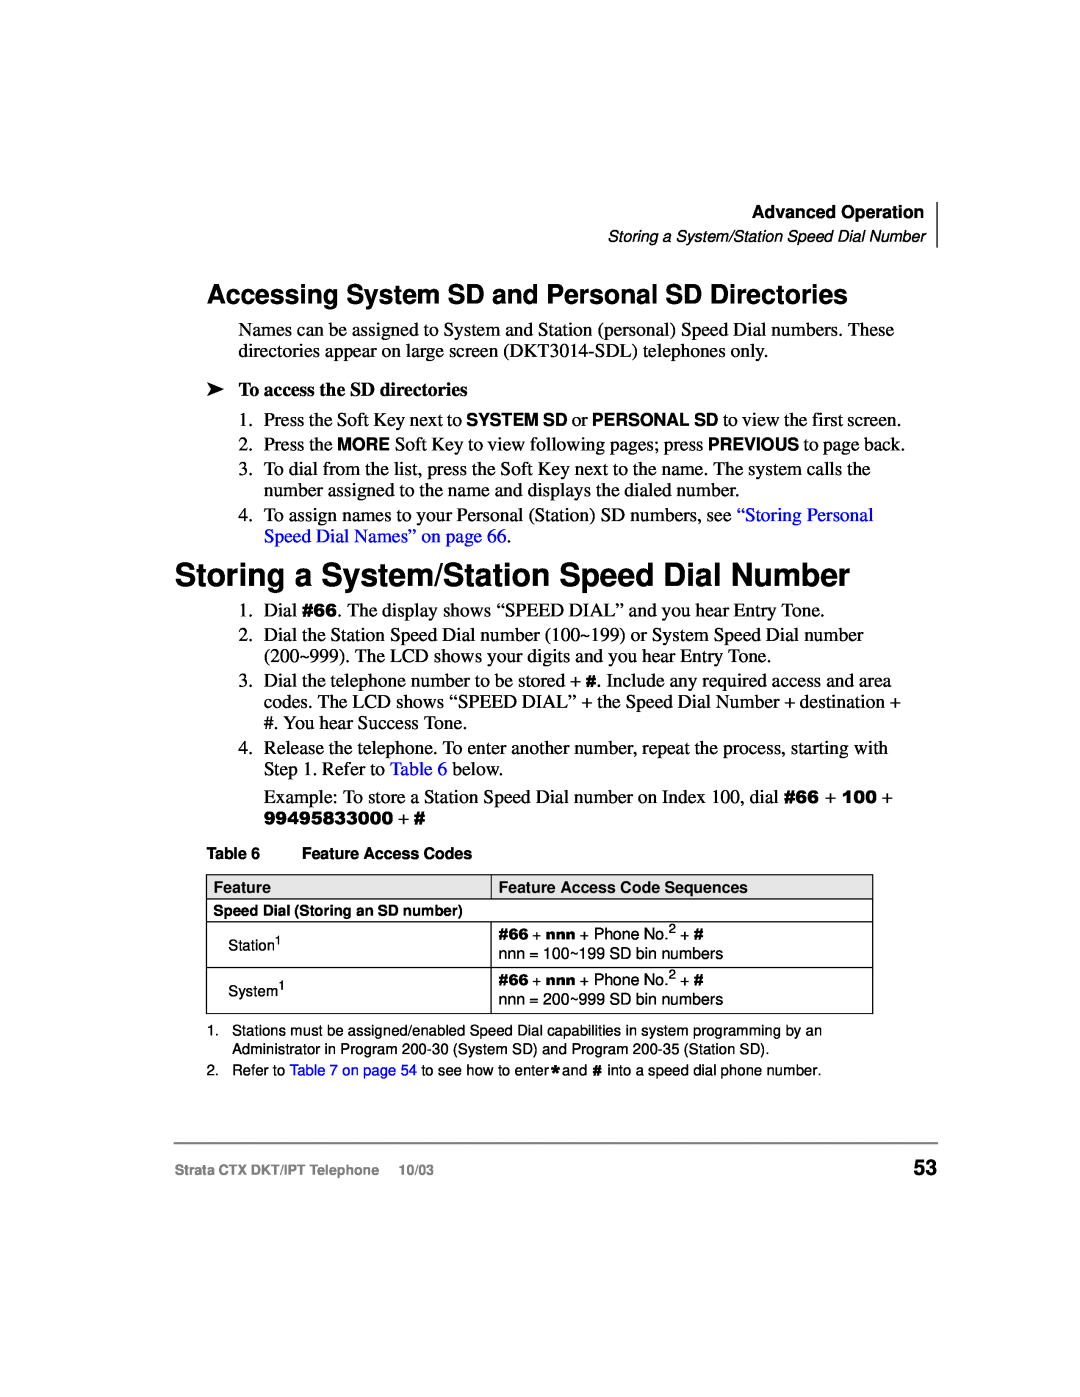 Toshiba DKT, IPT manual Storing a System/Station Speed Dial Number, Accessing System SD and Personal SD Directories 